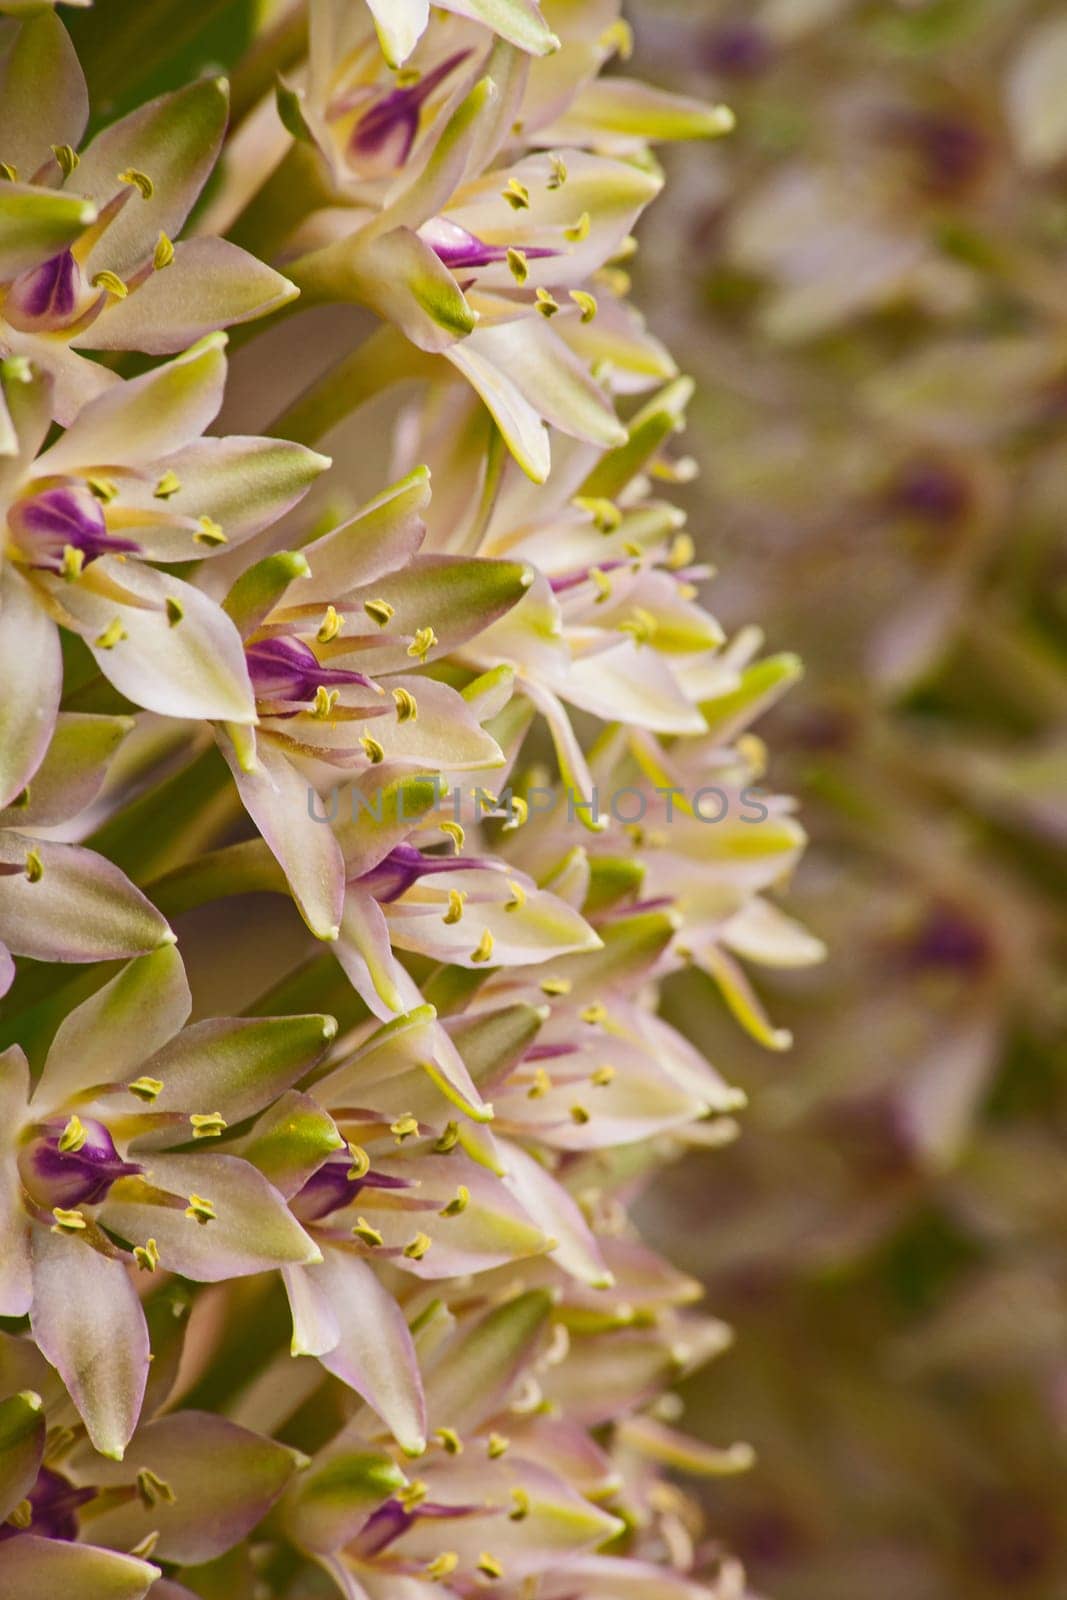 Macro image of the flowers of Eucomis autumnalis also known as Pineapple Lily or Autumn Pineapple Lily photographed in full bloom in the Walter Sisulu Botanical Garden Johannesburg South Africa